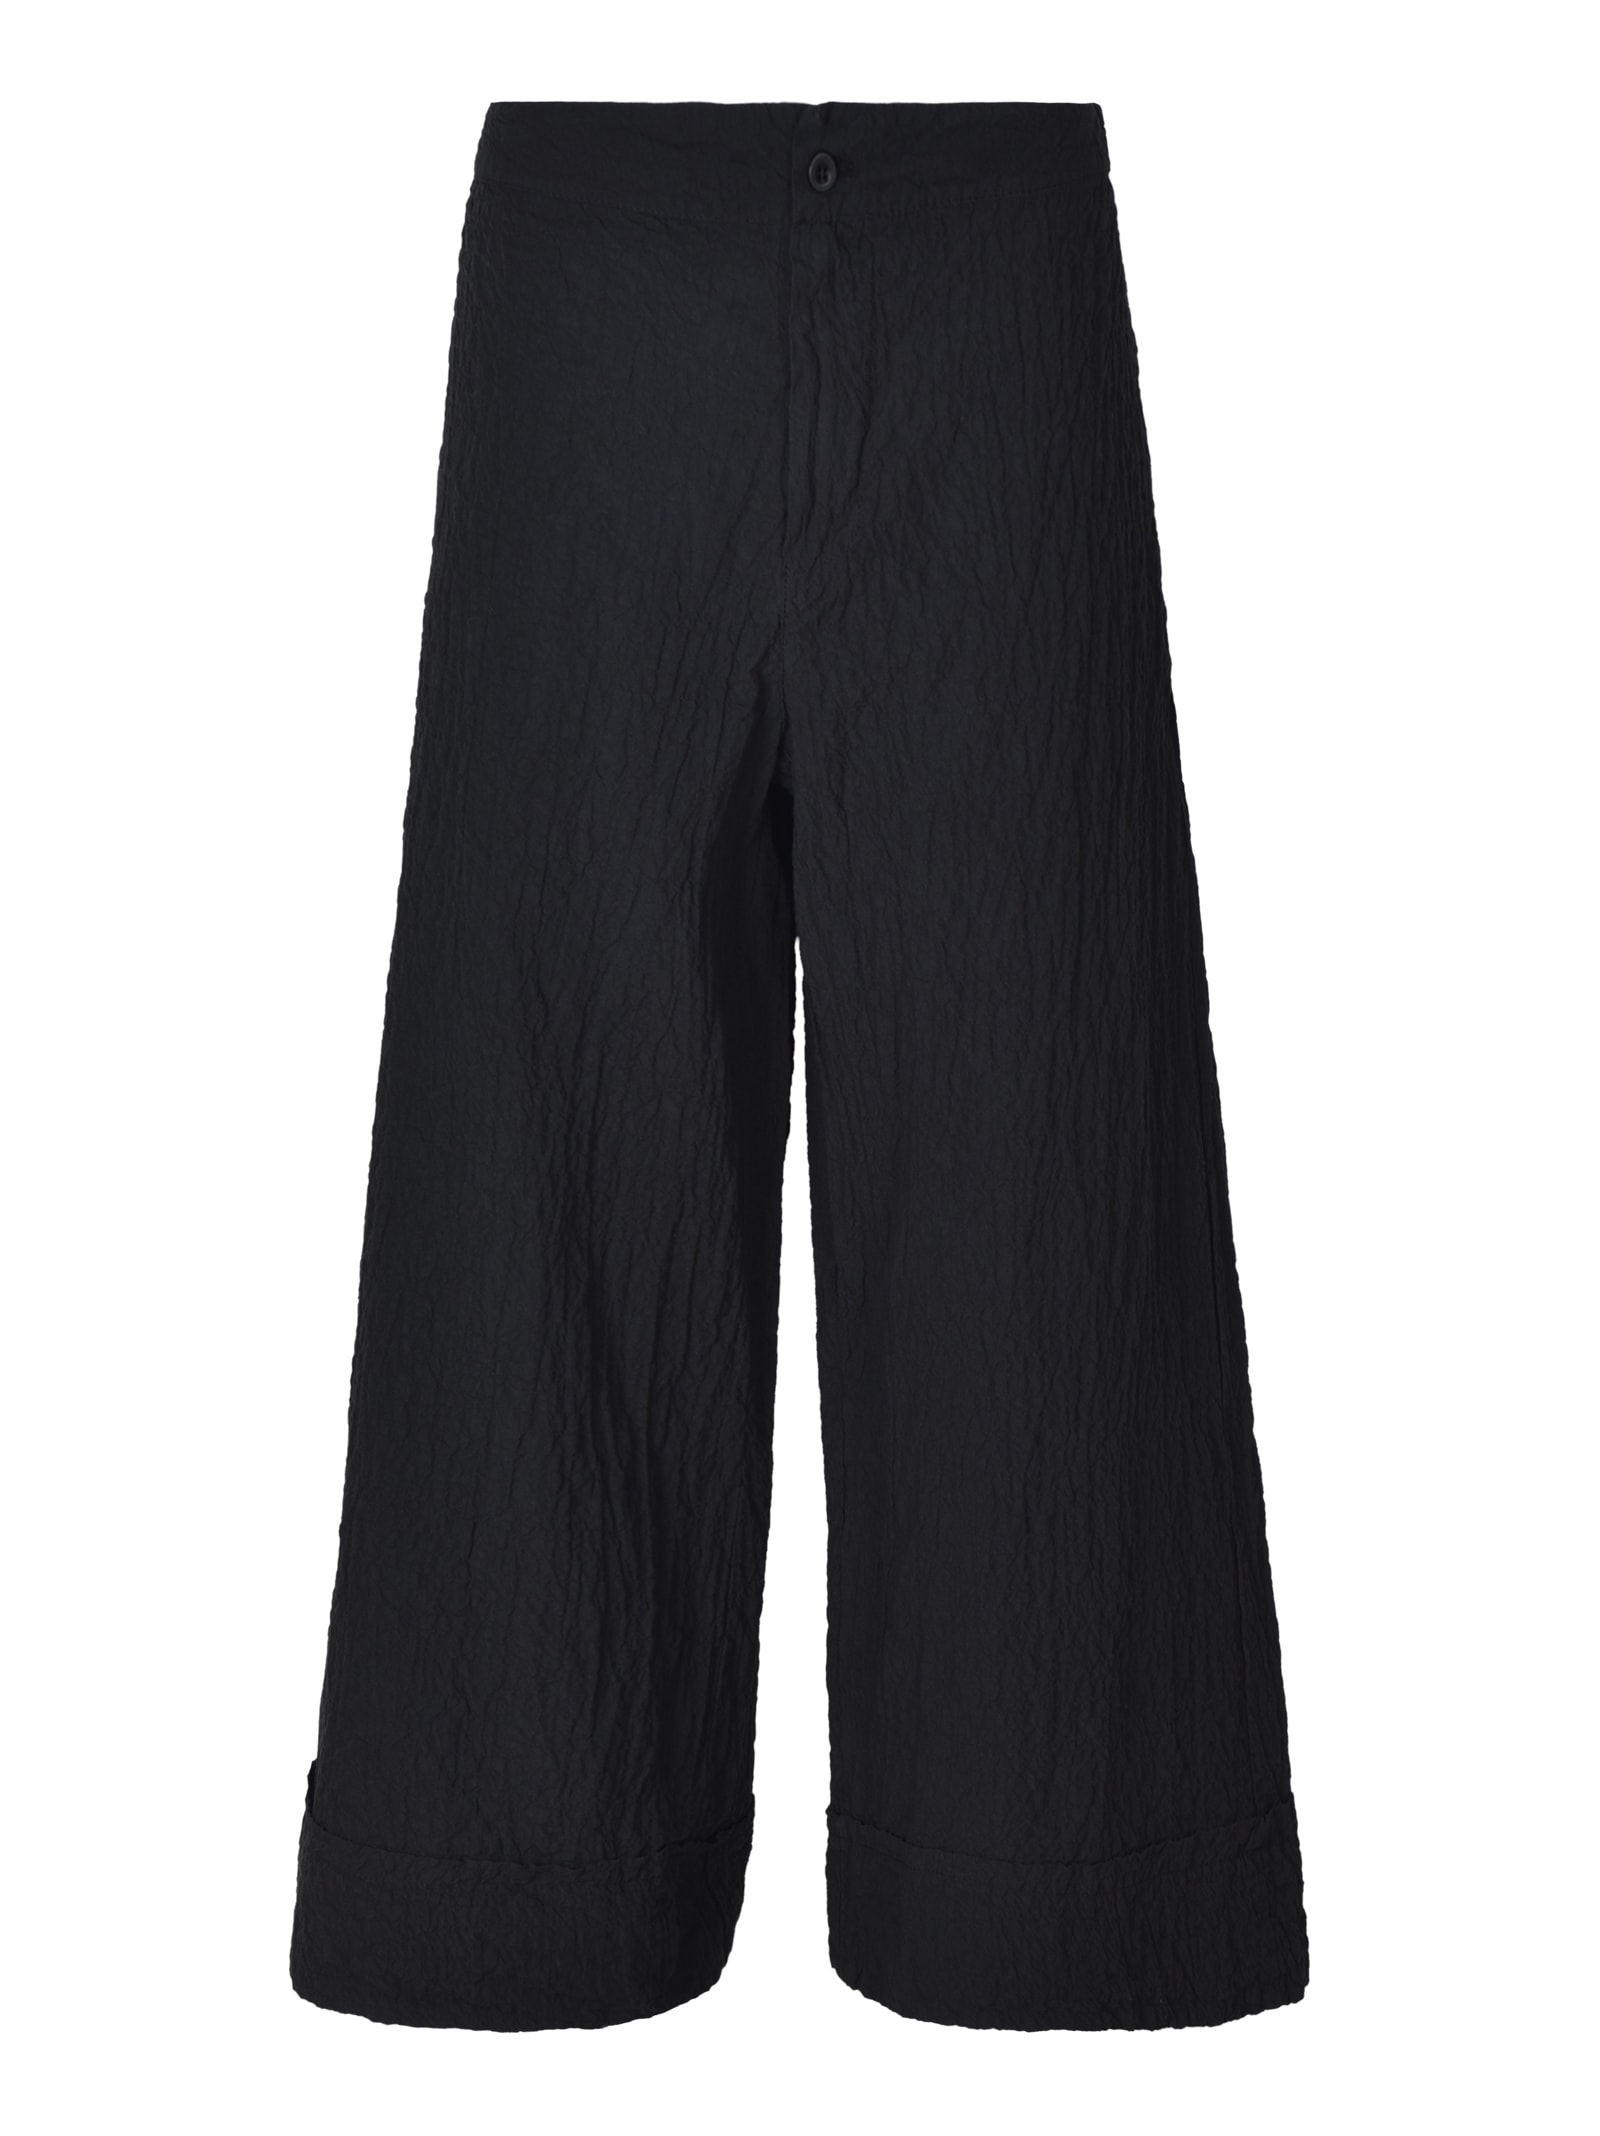 Labo.Art Straight Buttoned Crepe Trousers